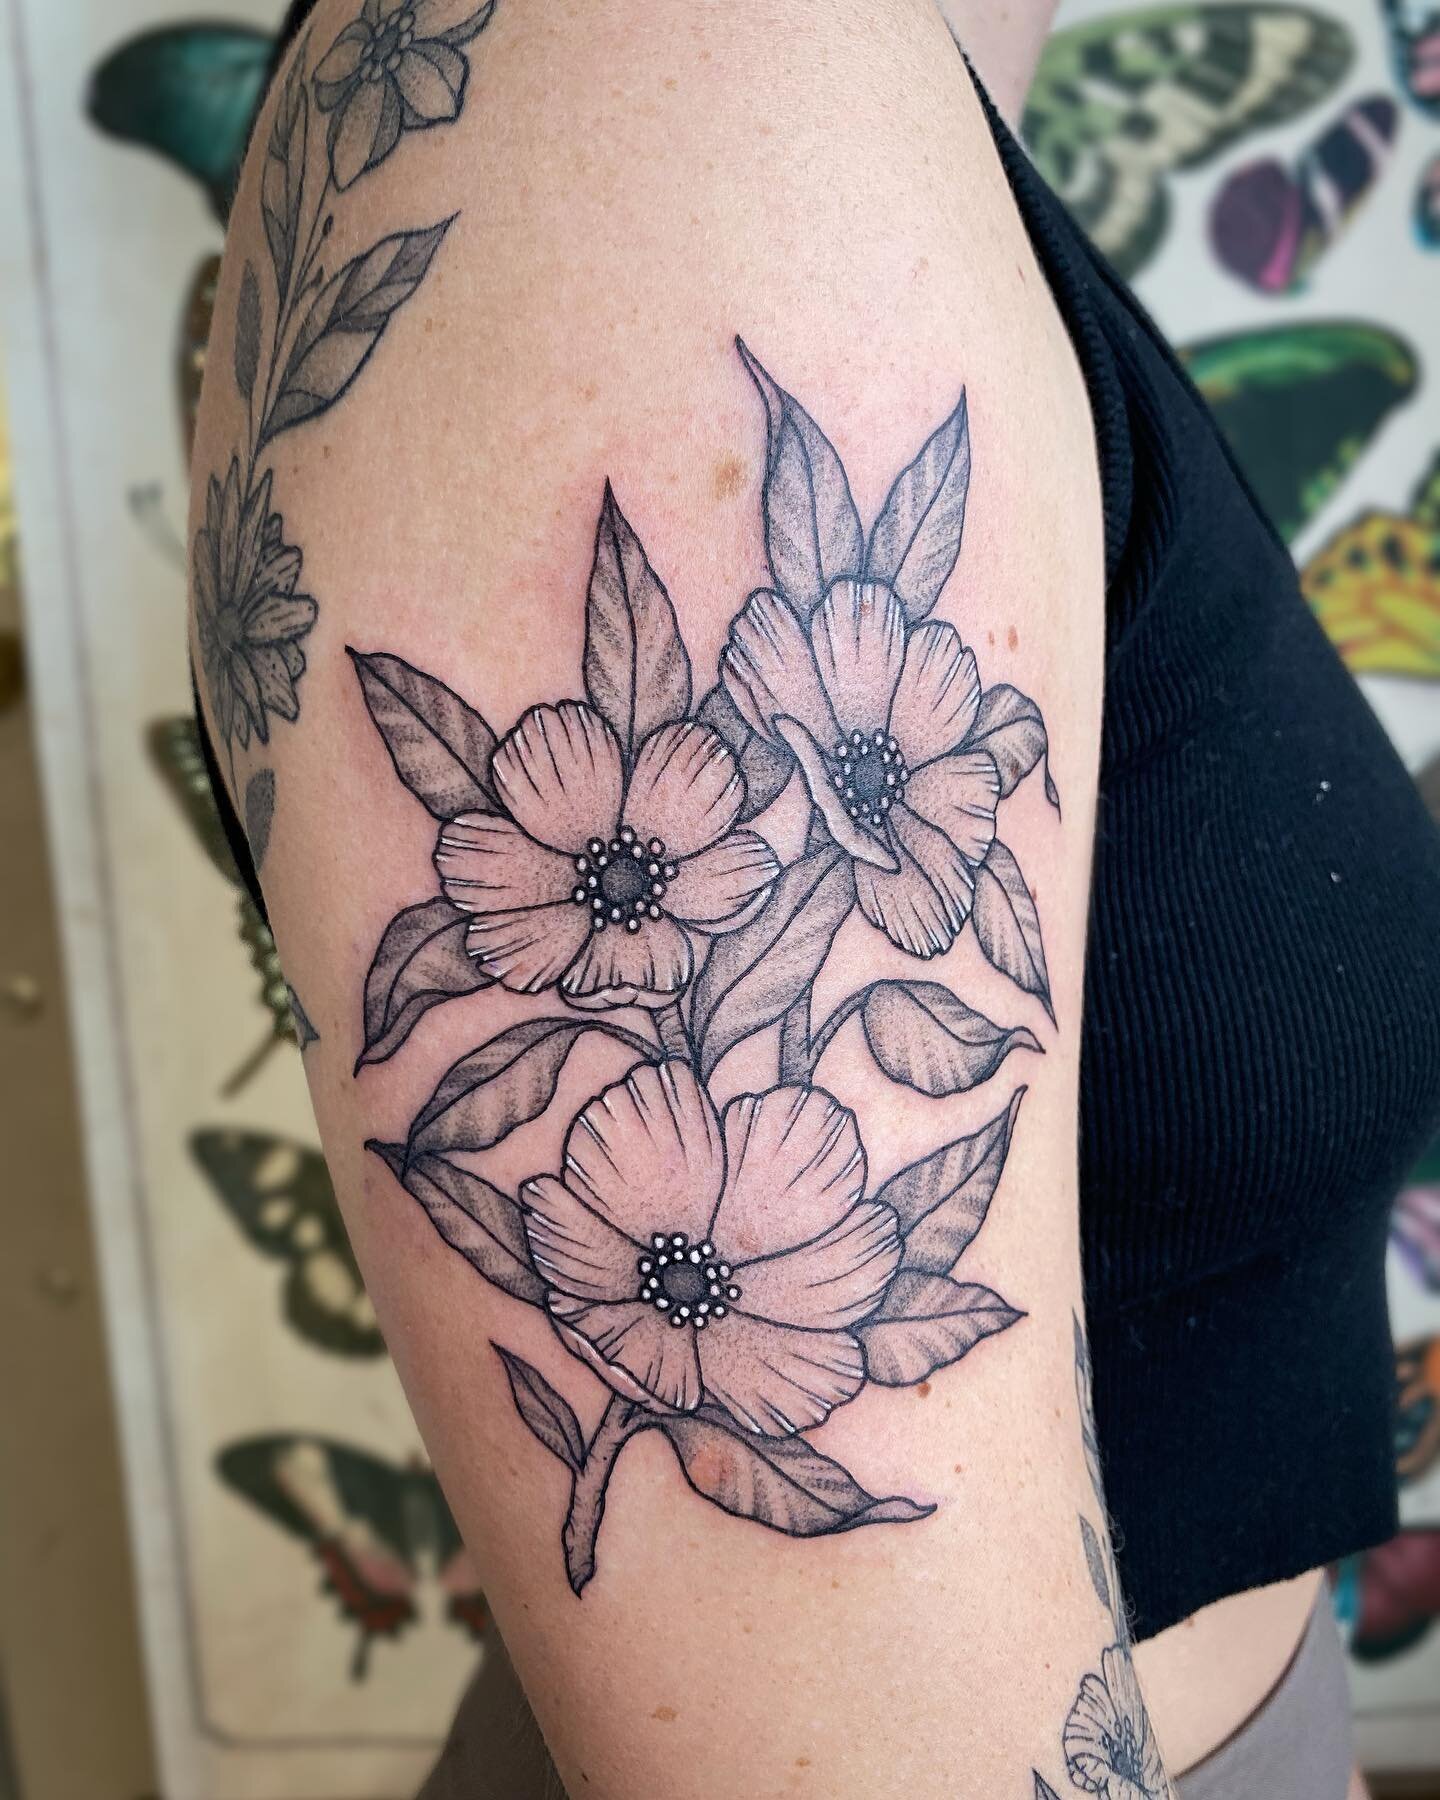 ▪️flower filler▪️

So many flowers lately and it&rsquo;s got me in the spring mood 🌸 
Love this piece that&rsquo;s perfectly framed by a healed floral wrap, thanks so much @alisonlee___ for the trust! ✨

#flowertattoo #corvallistattoo #downtowncorva